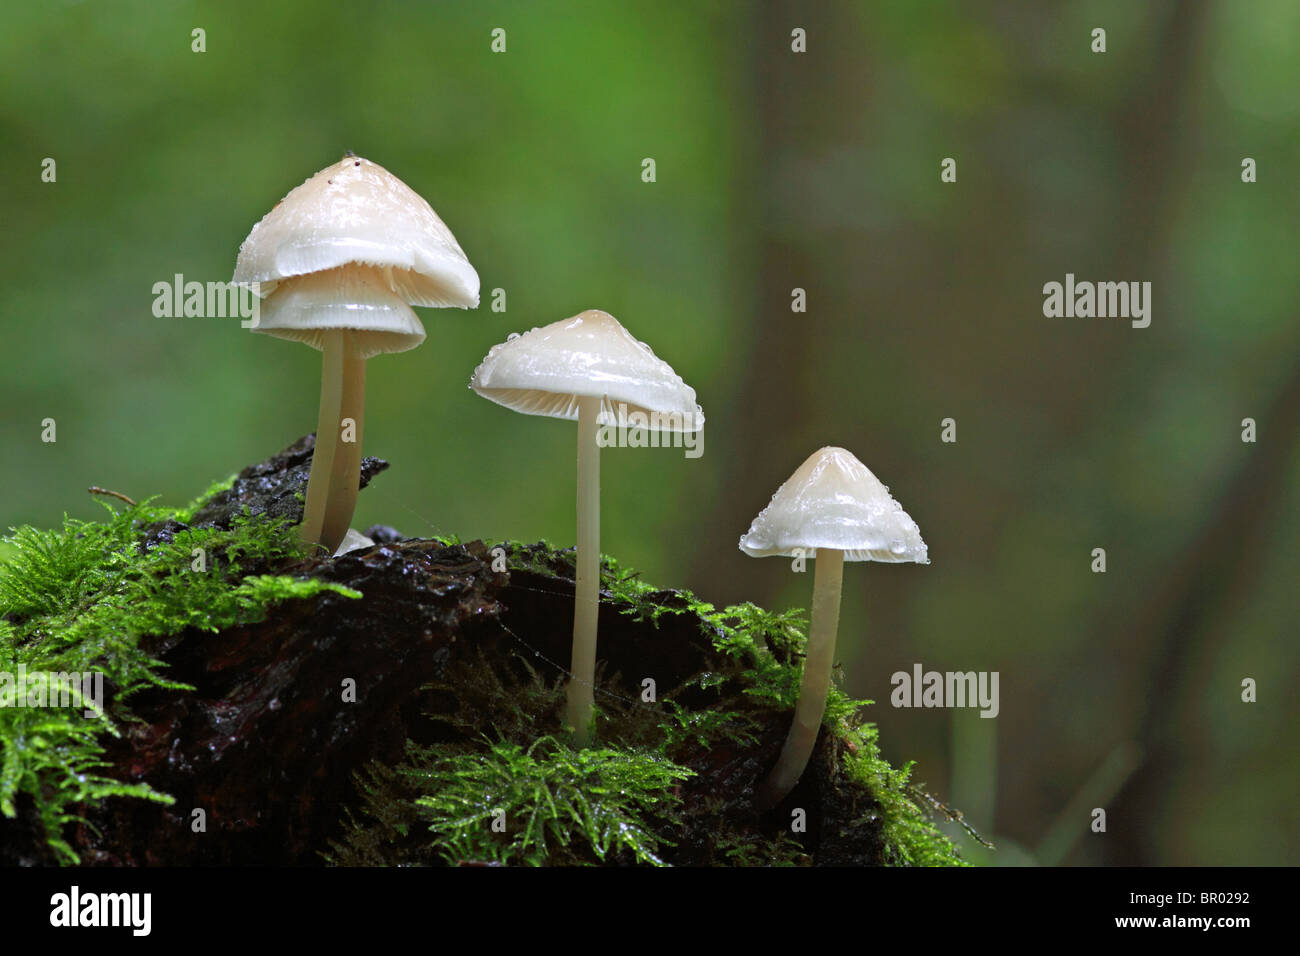 Mycena inclinata fungi growing on fallen tree trunk in moss with diffuse background Stock Photo